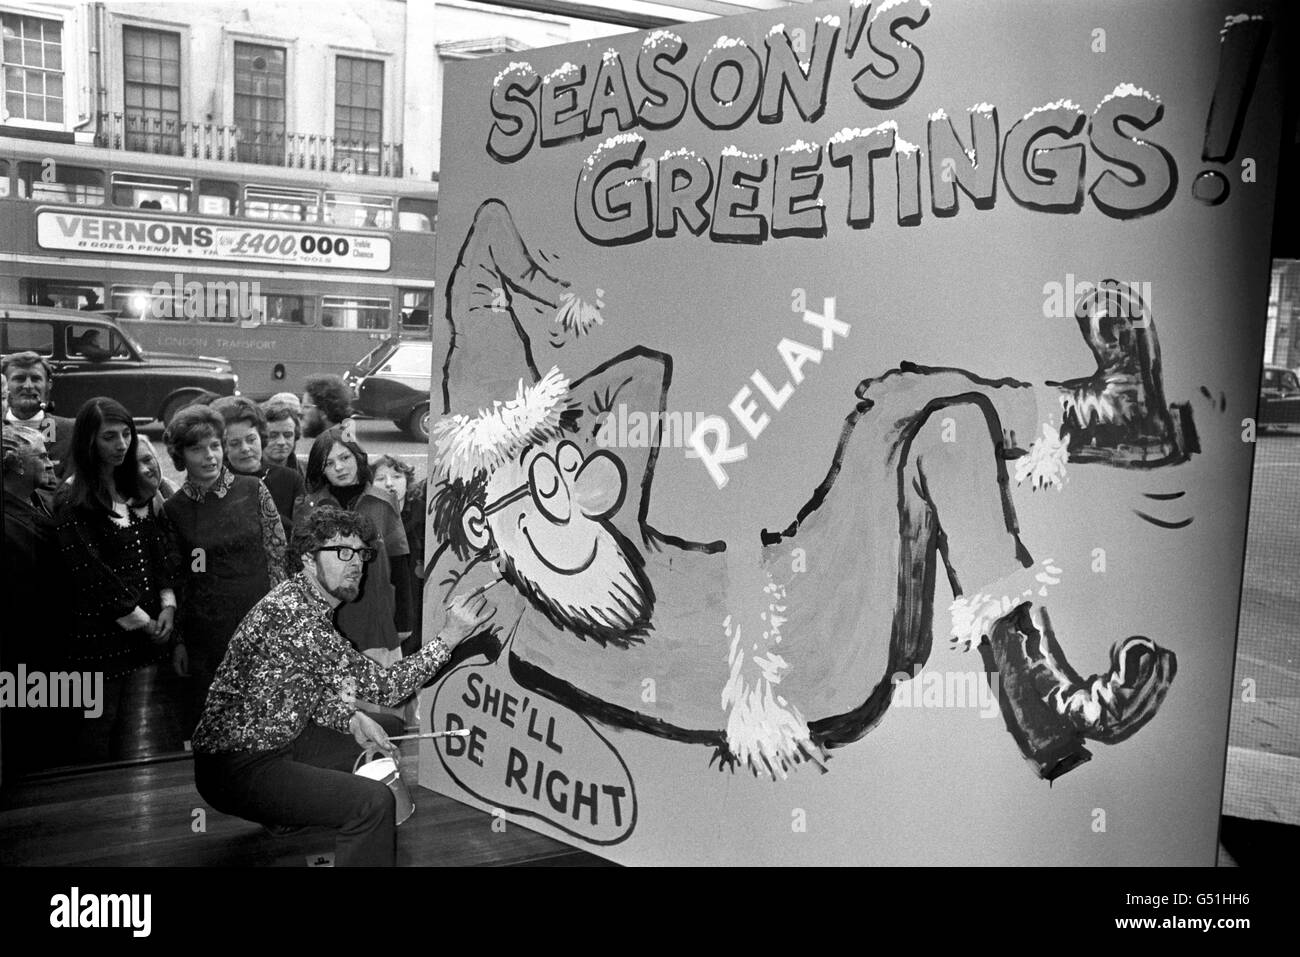 Window shoppers get a free seasonal greeting in the form of an 8' X 8' painting by entertainer Rolf Harris, in the window of the offices of the Western Australian Government in London. Stock Photo